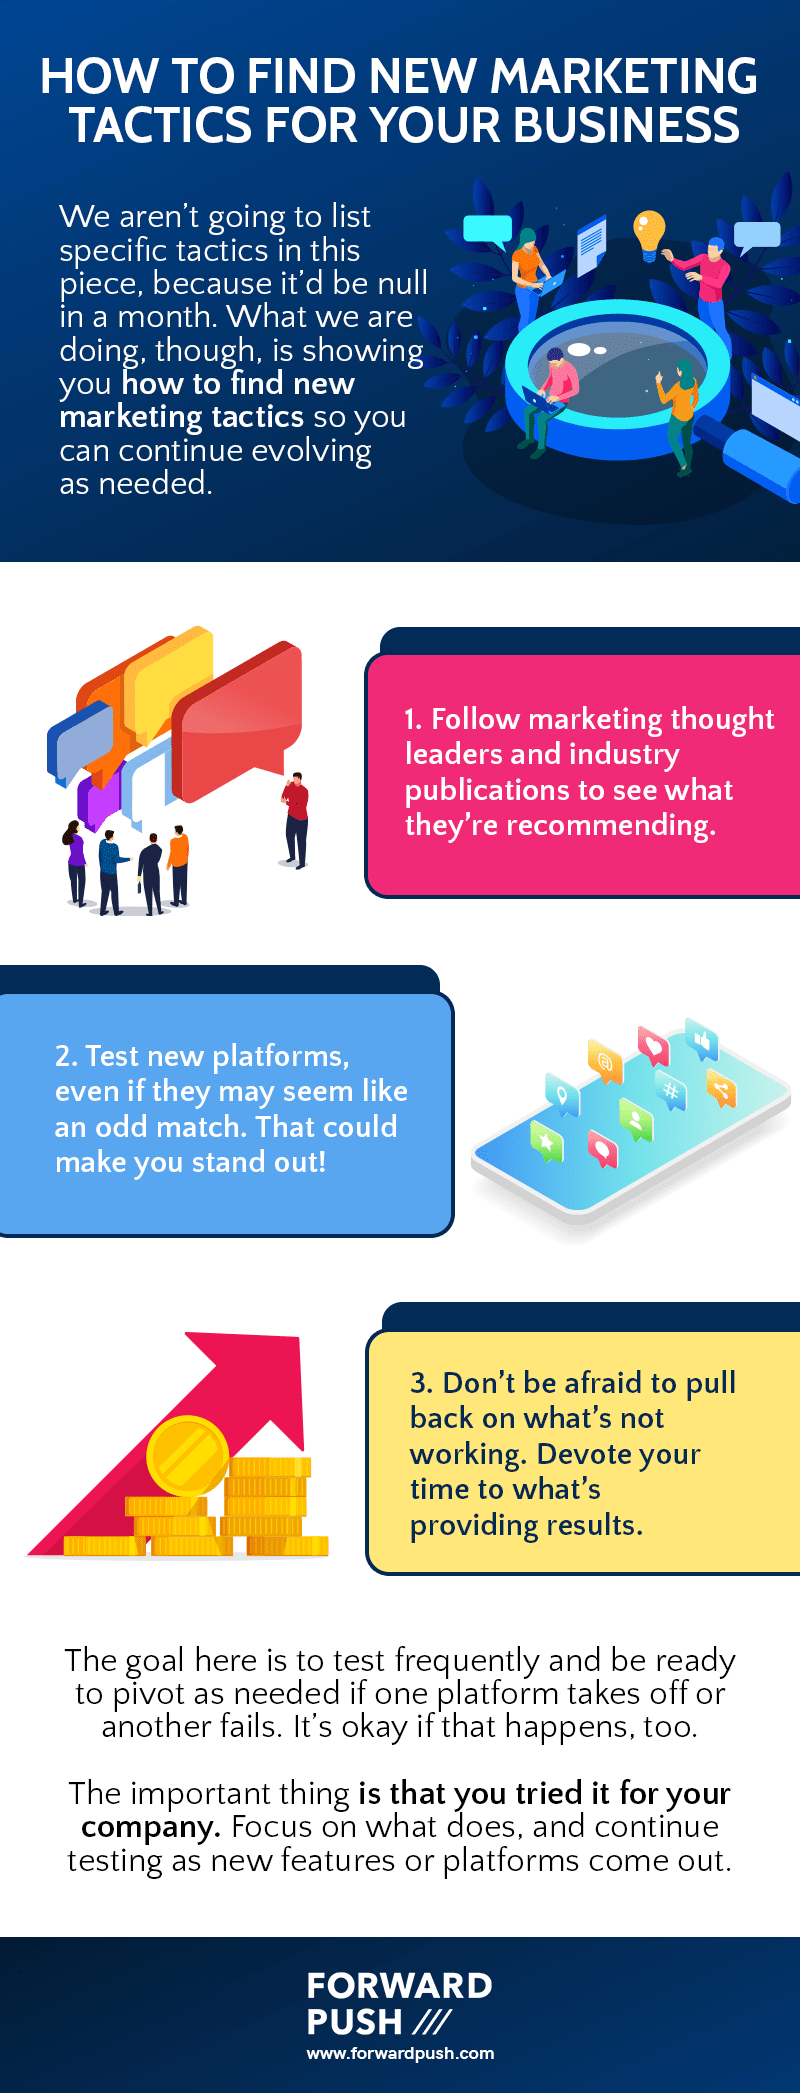 infographic-new-marketing-tactics-for-your-business